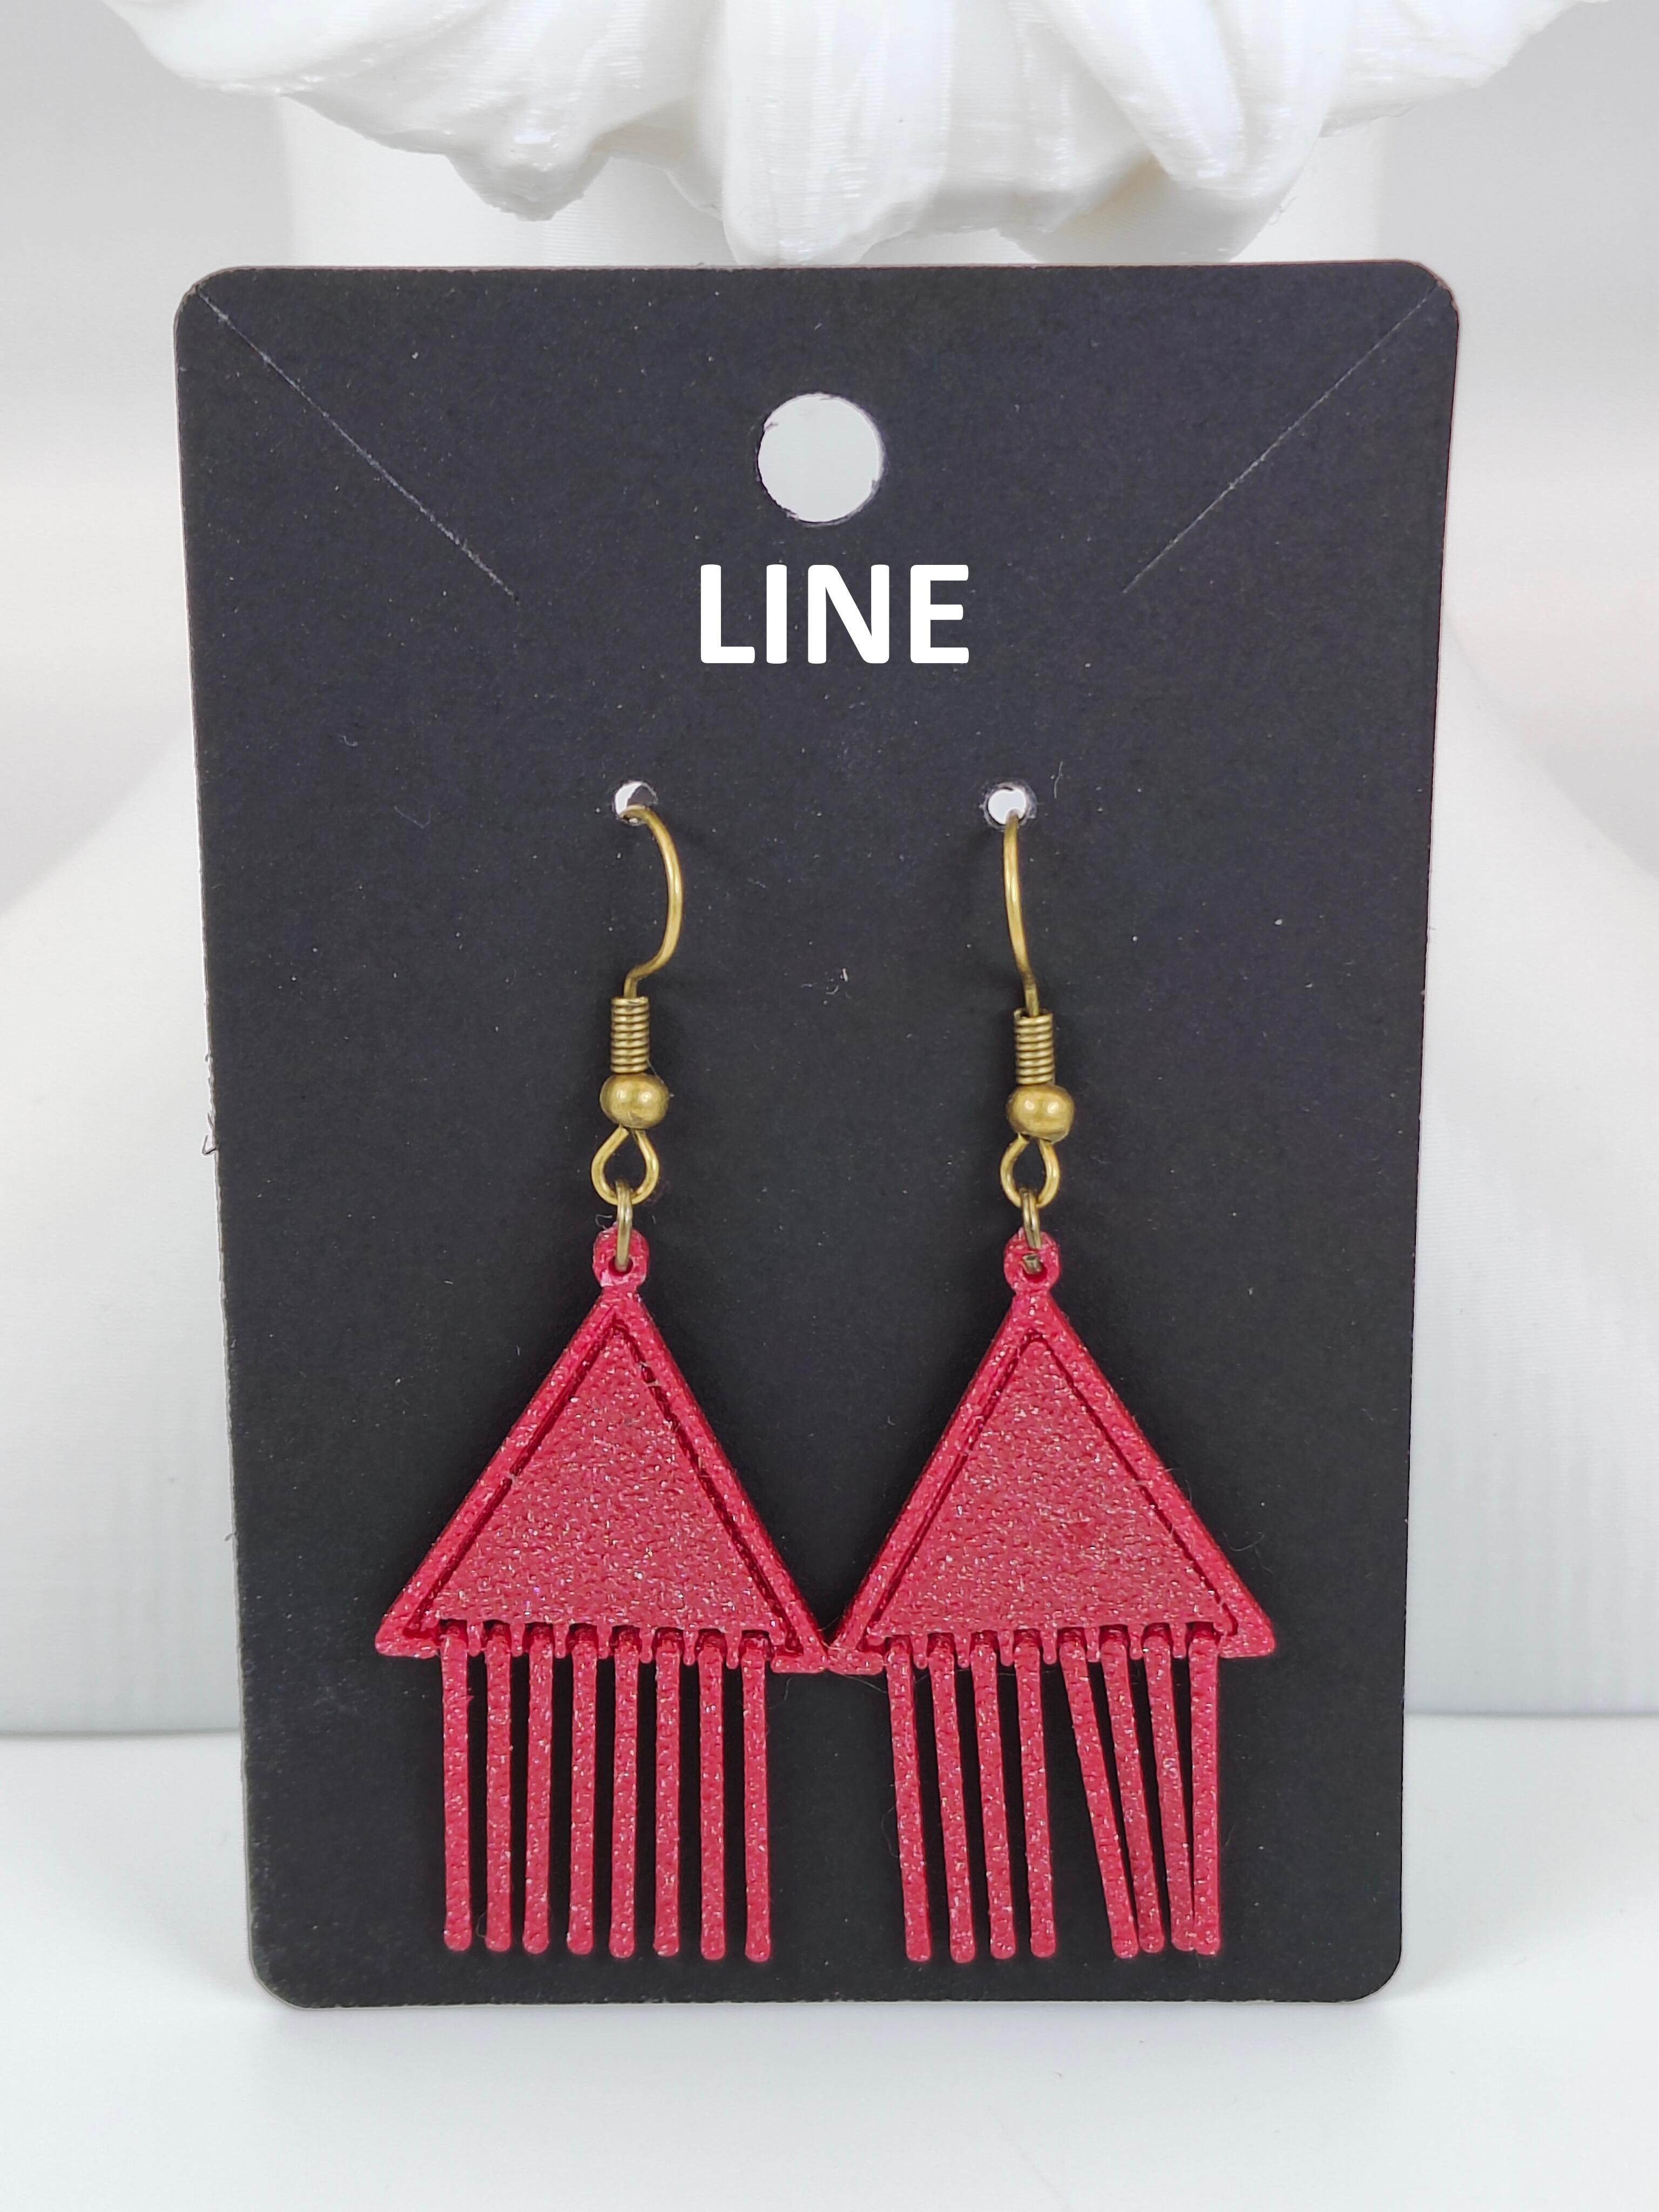 3D Printable Earring - Triangle Trickle Line 3d model